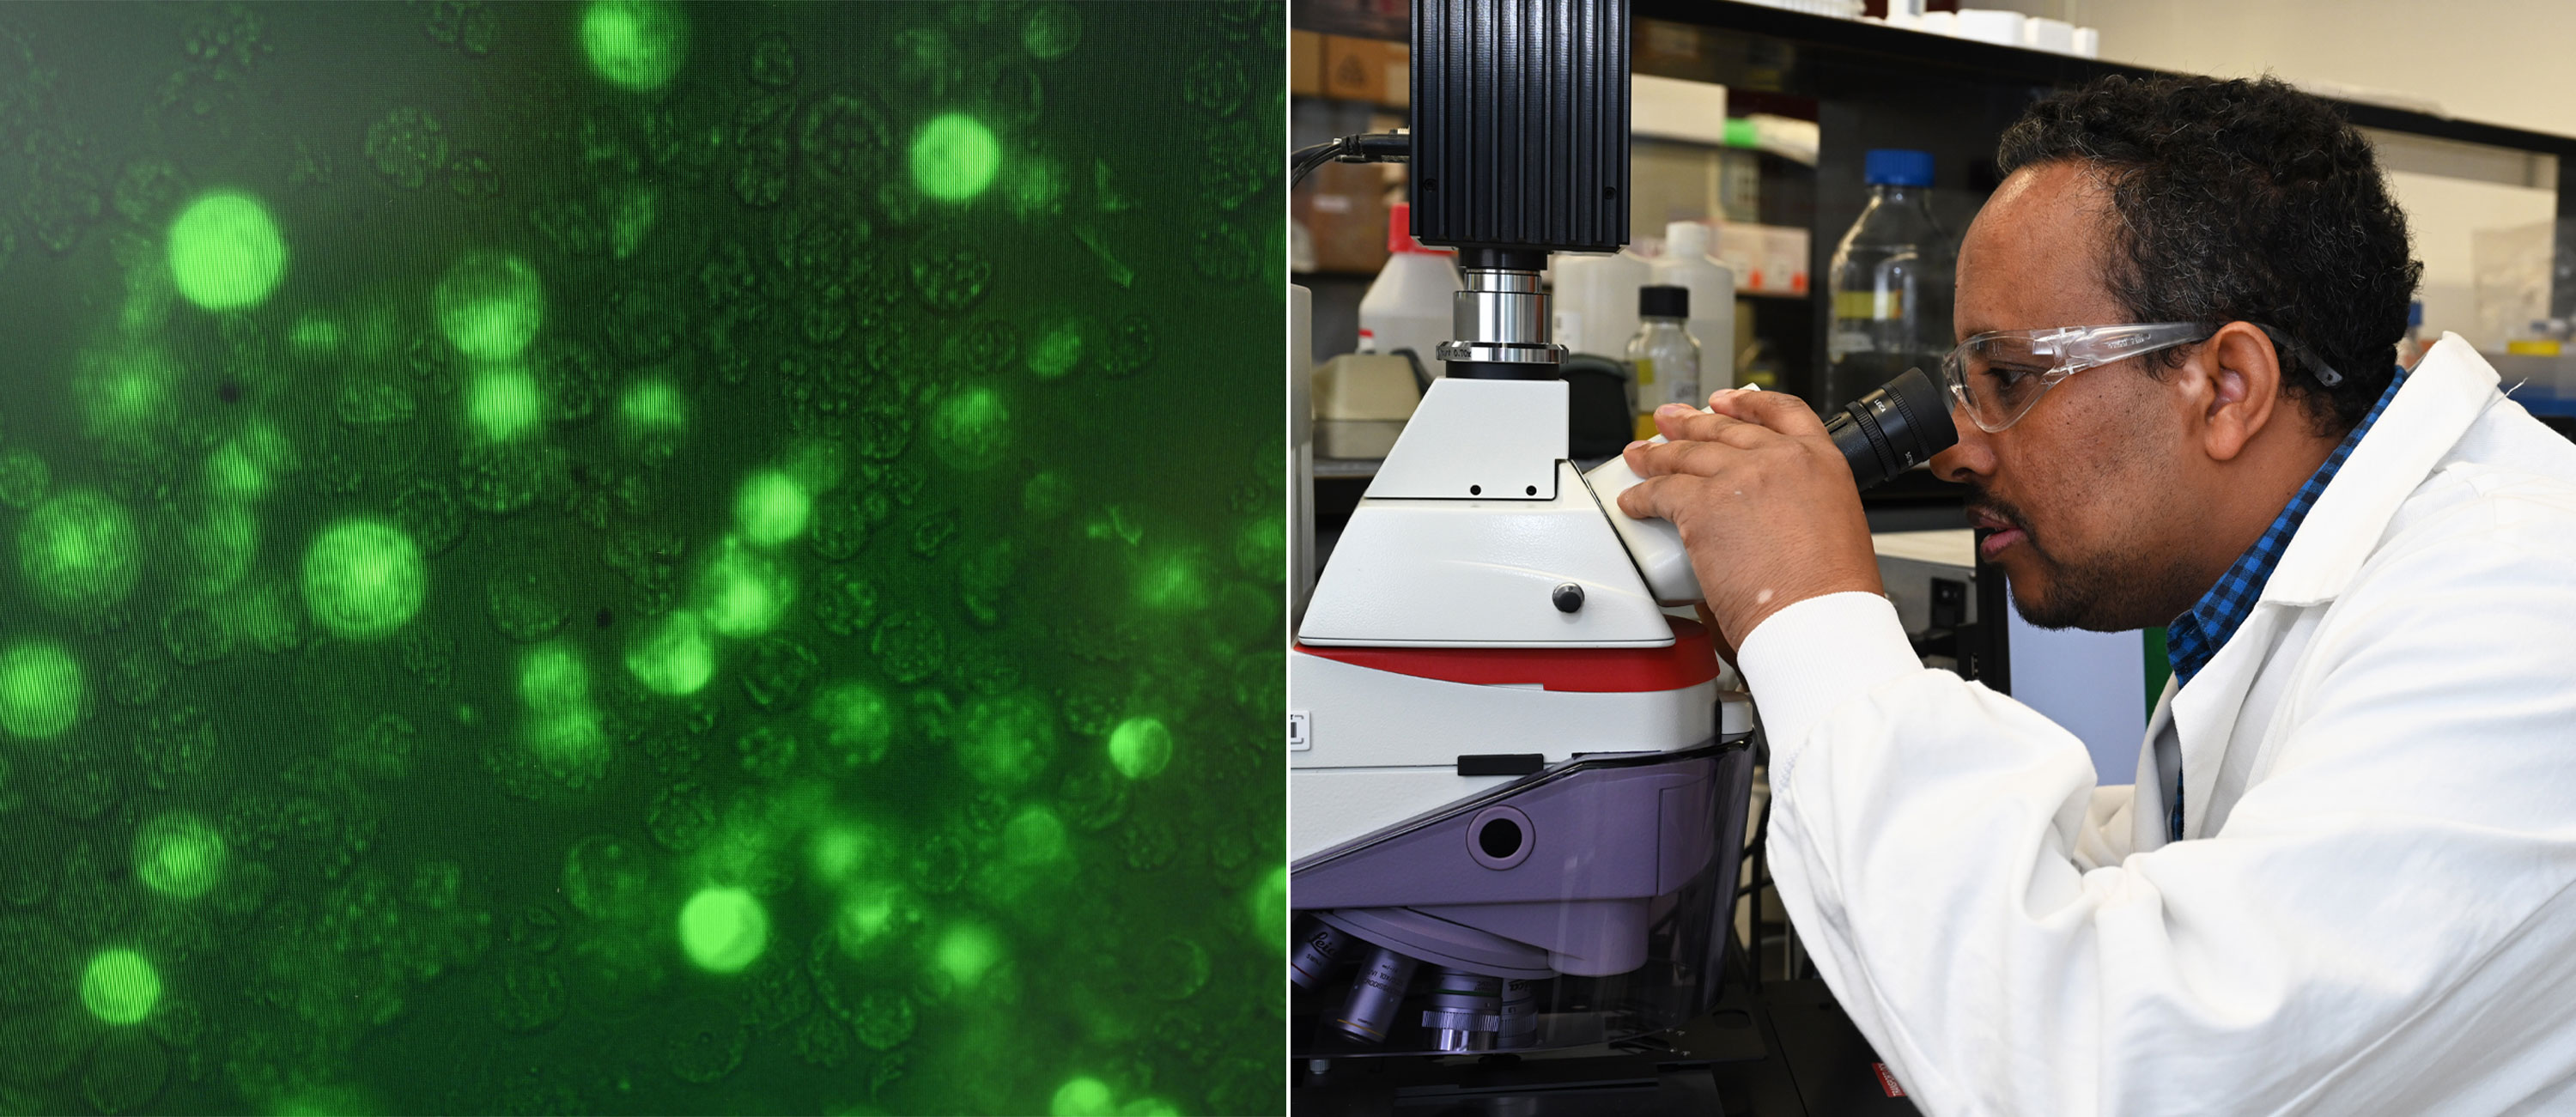 The team used plant protoplasts — plant cells without cell walls — to express and study the effects of various genes. Left: Protoplasts expressing green fluorescent protein. Right: Dimiru Tadesse focuses on transformed protoplasts using a fluorescent microscope.